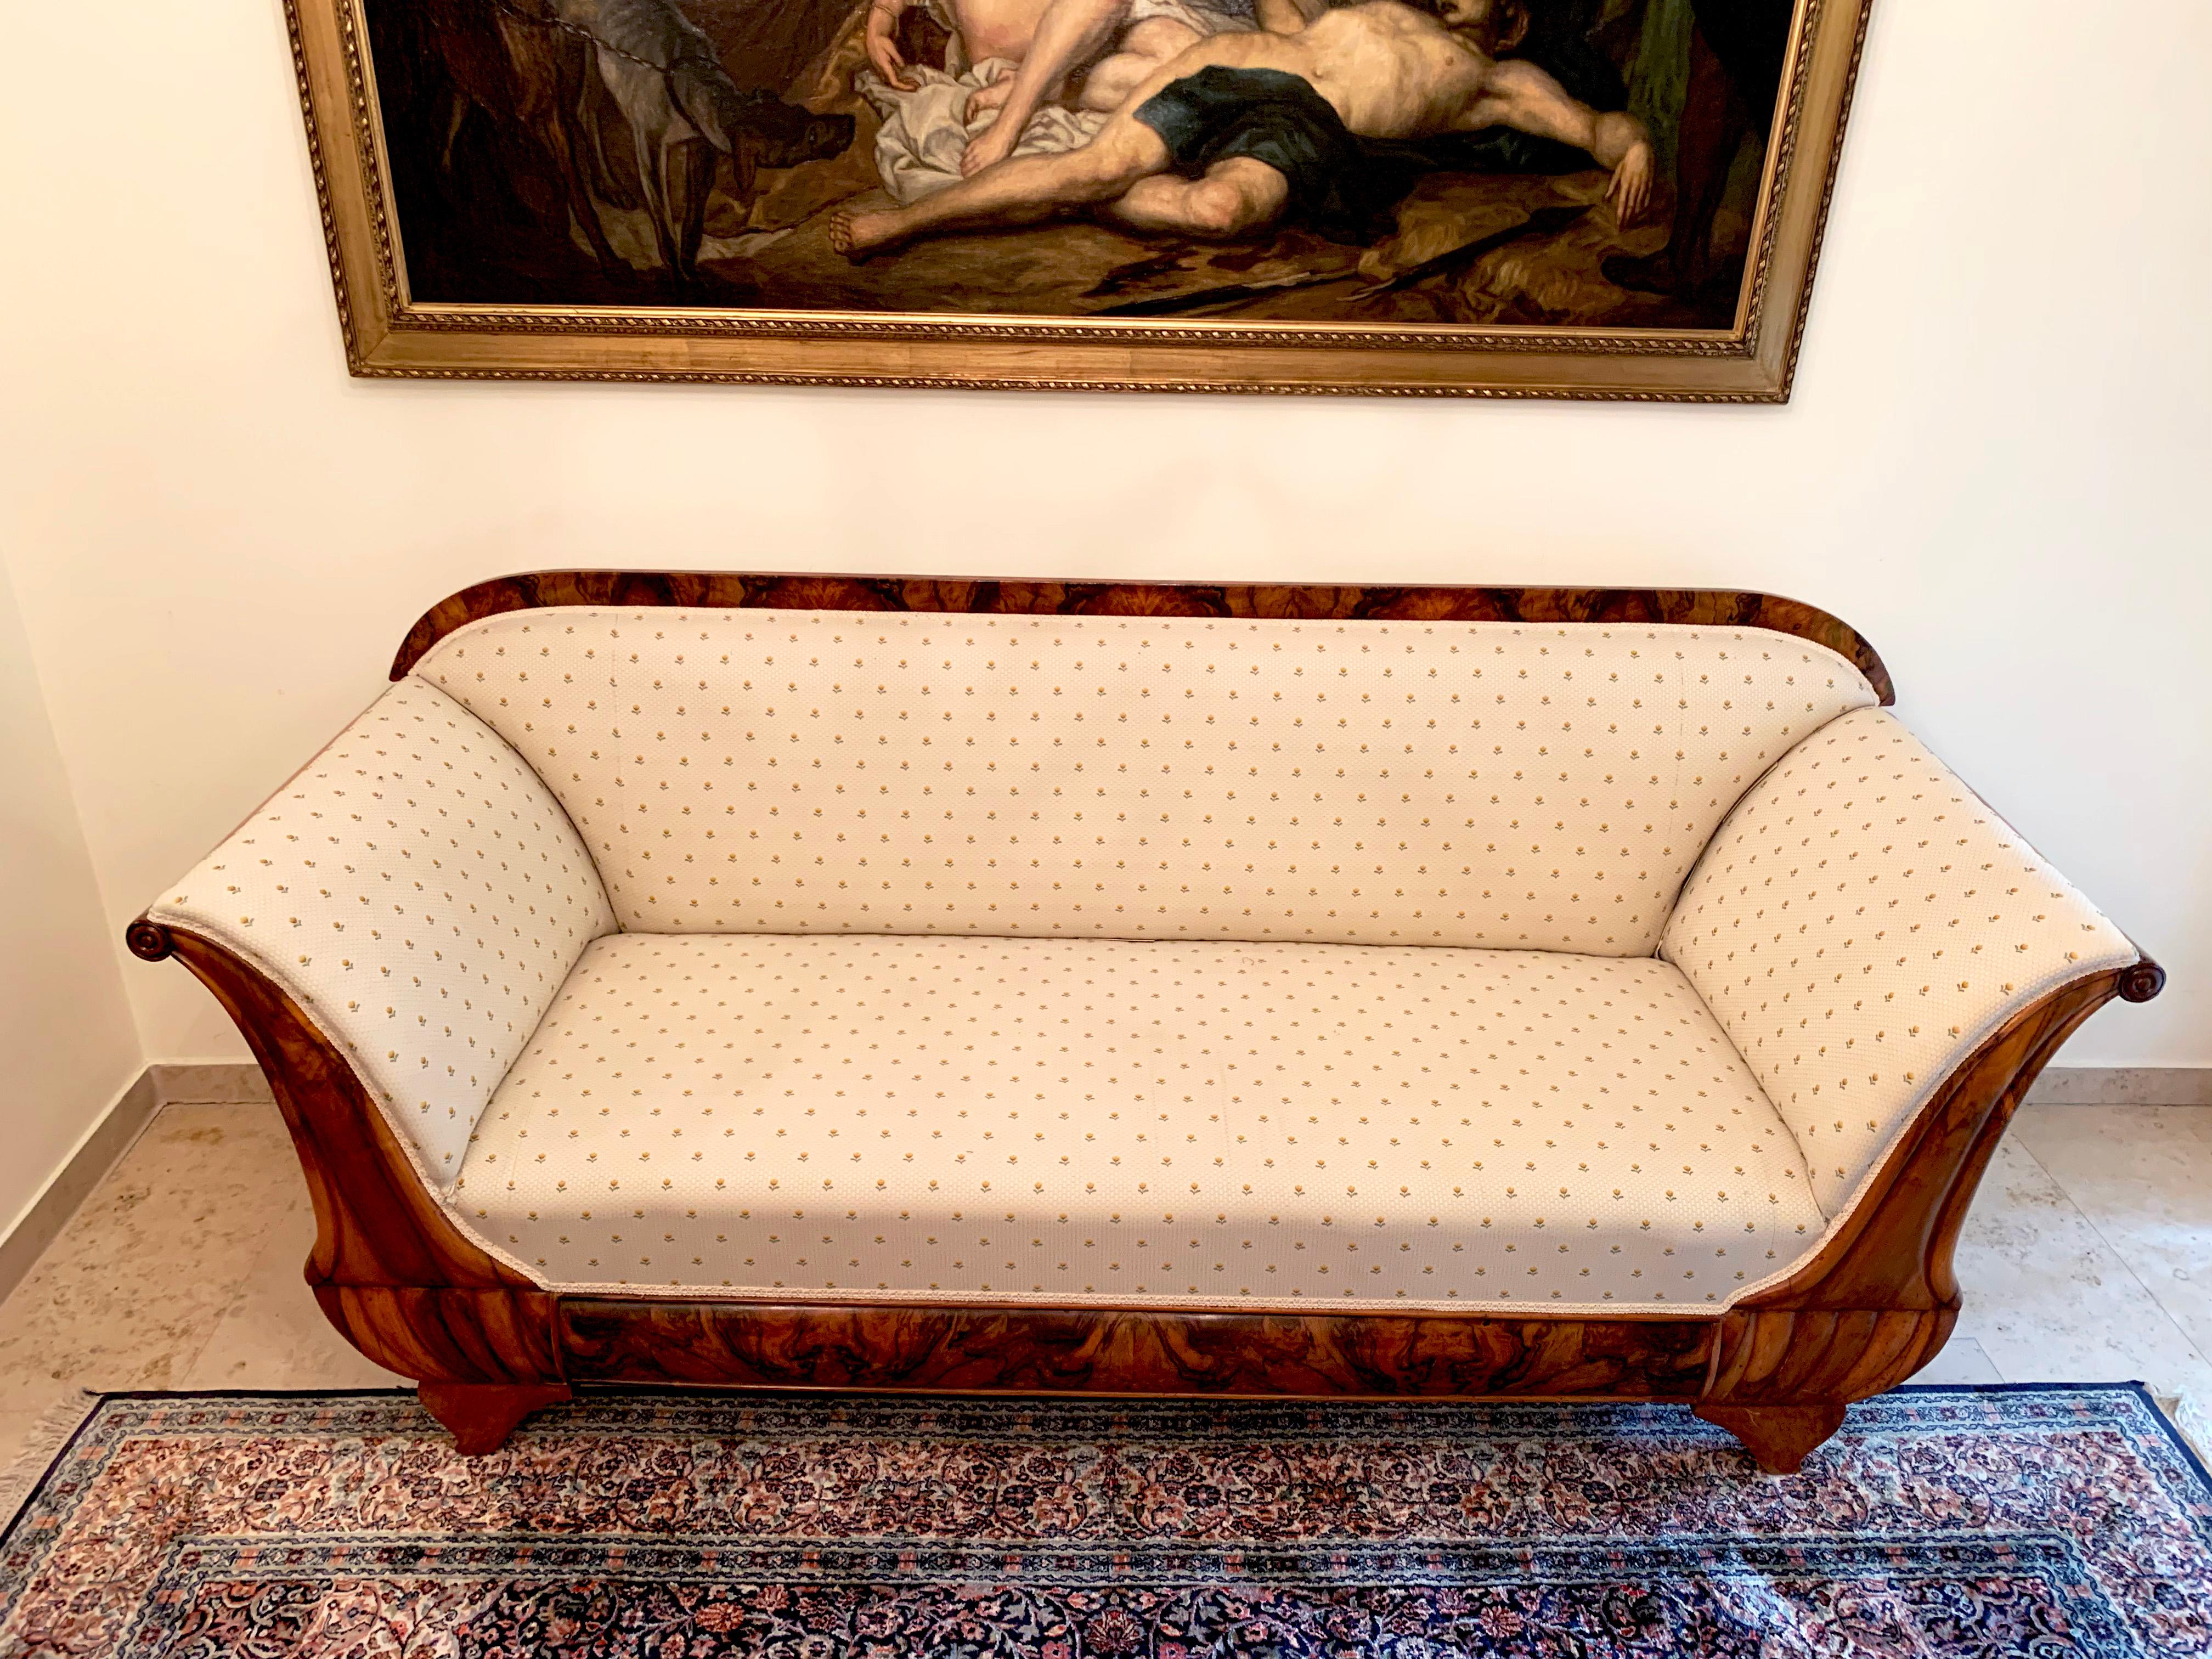 Large Biedermeier sofa circa 1830 in a typical cream material with yellow flowers.
This beautiful cream sofa is made out of walnut. It is an elegant piece.
The Biedermeier period refers to an era in Central Europe between 1815 and 1848, during